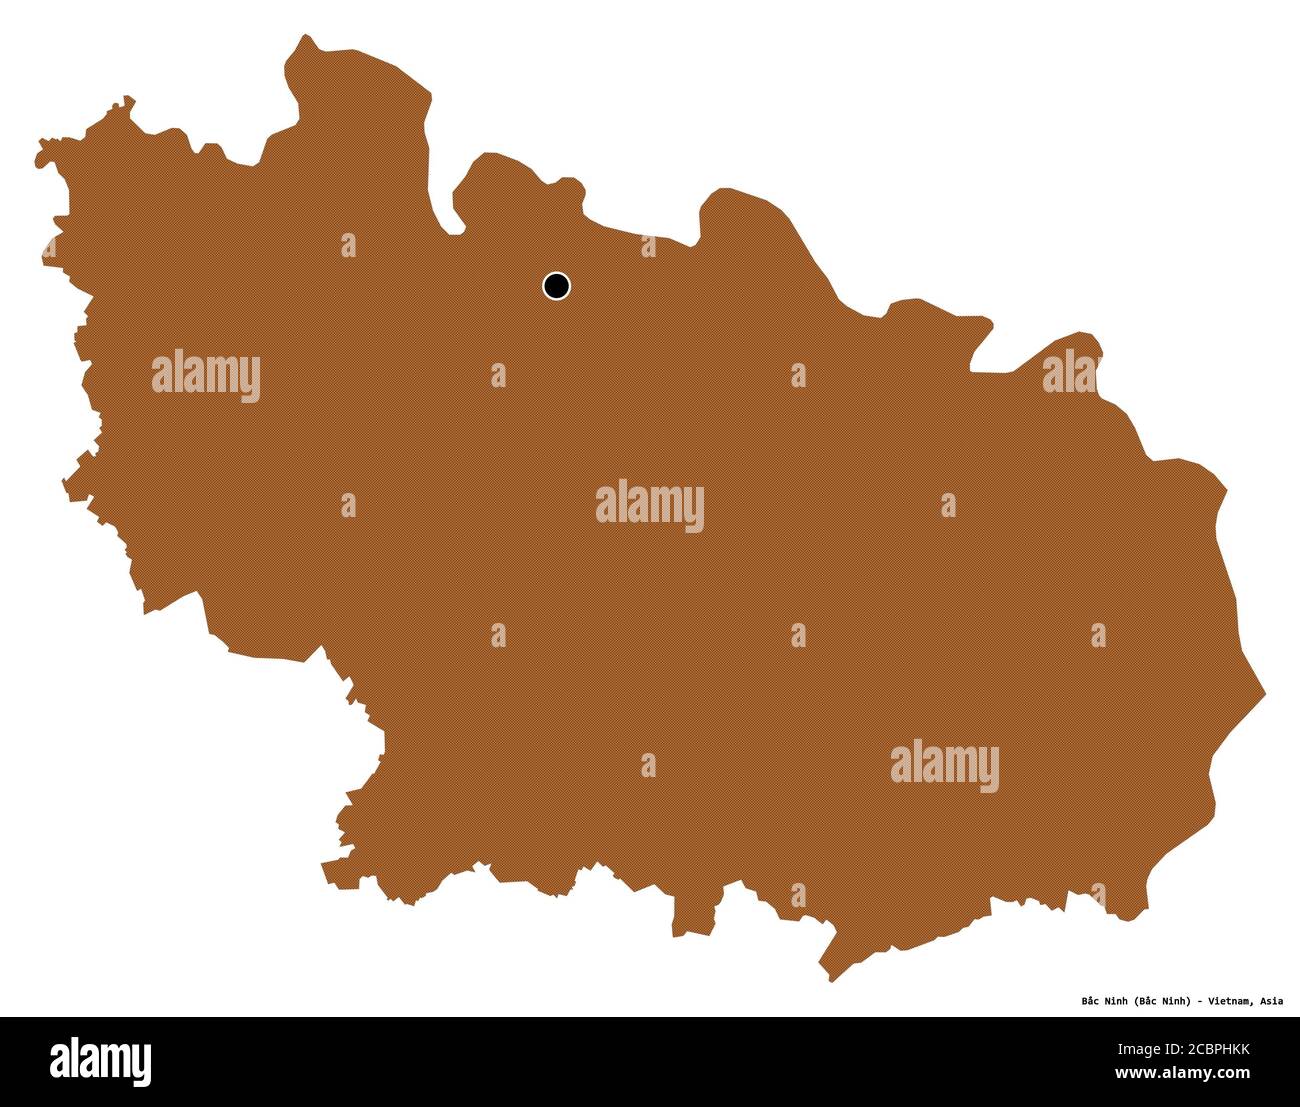 Shape of Bắc Ninh, province of Vietnam, with its capital isolated on white background. Composition of patterned textures. 3D rendering Stock Photo